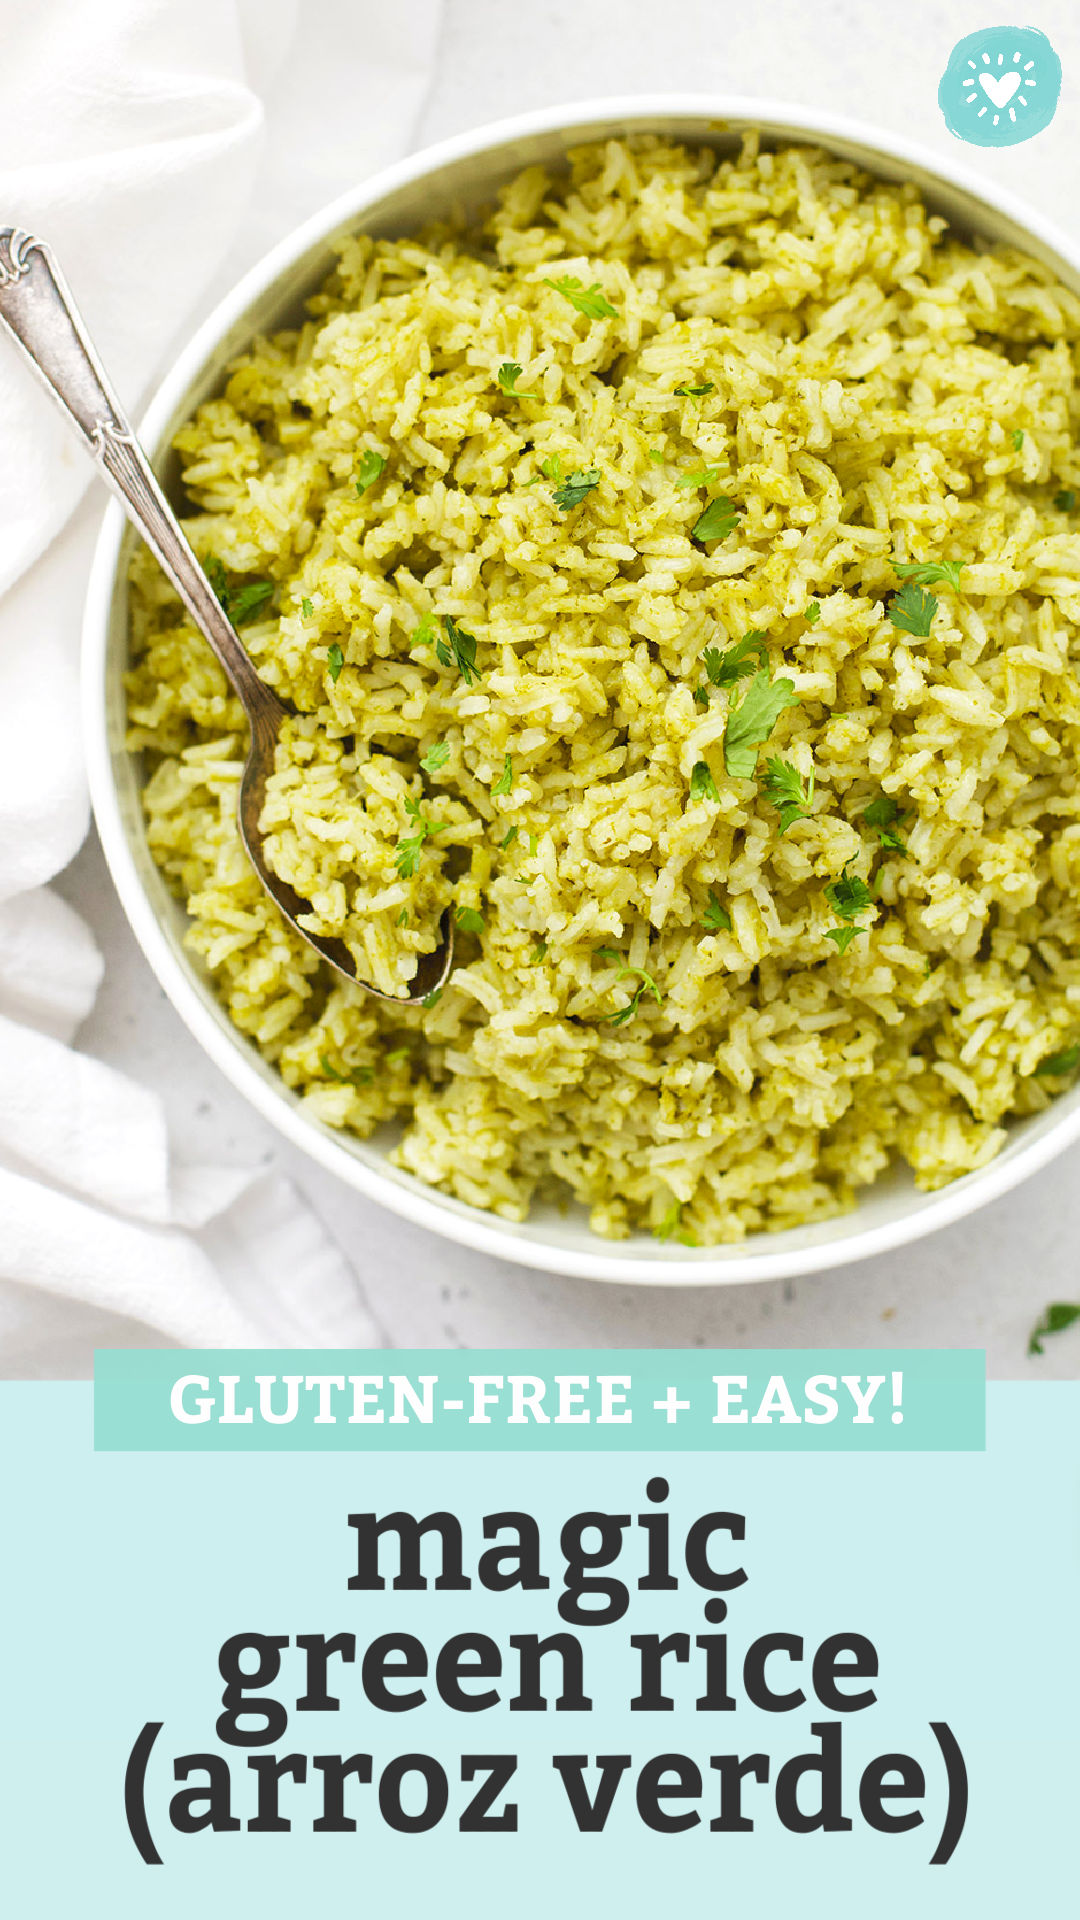 Mexican Green Rice (Arroz Verde) in a white bowl on a white background with text overlay that reads "Gluten-Free + Easy Magic Green Rice (Arroz Verde)"